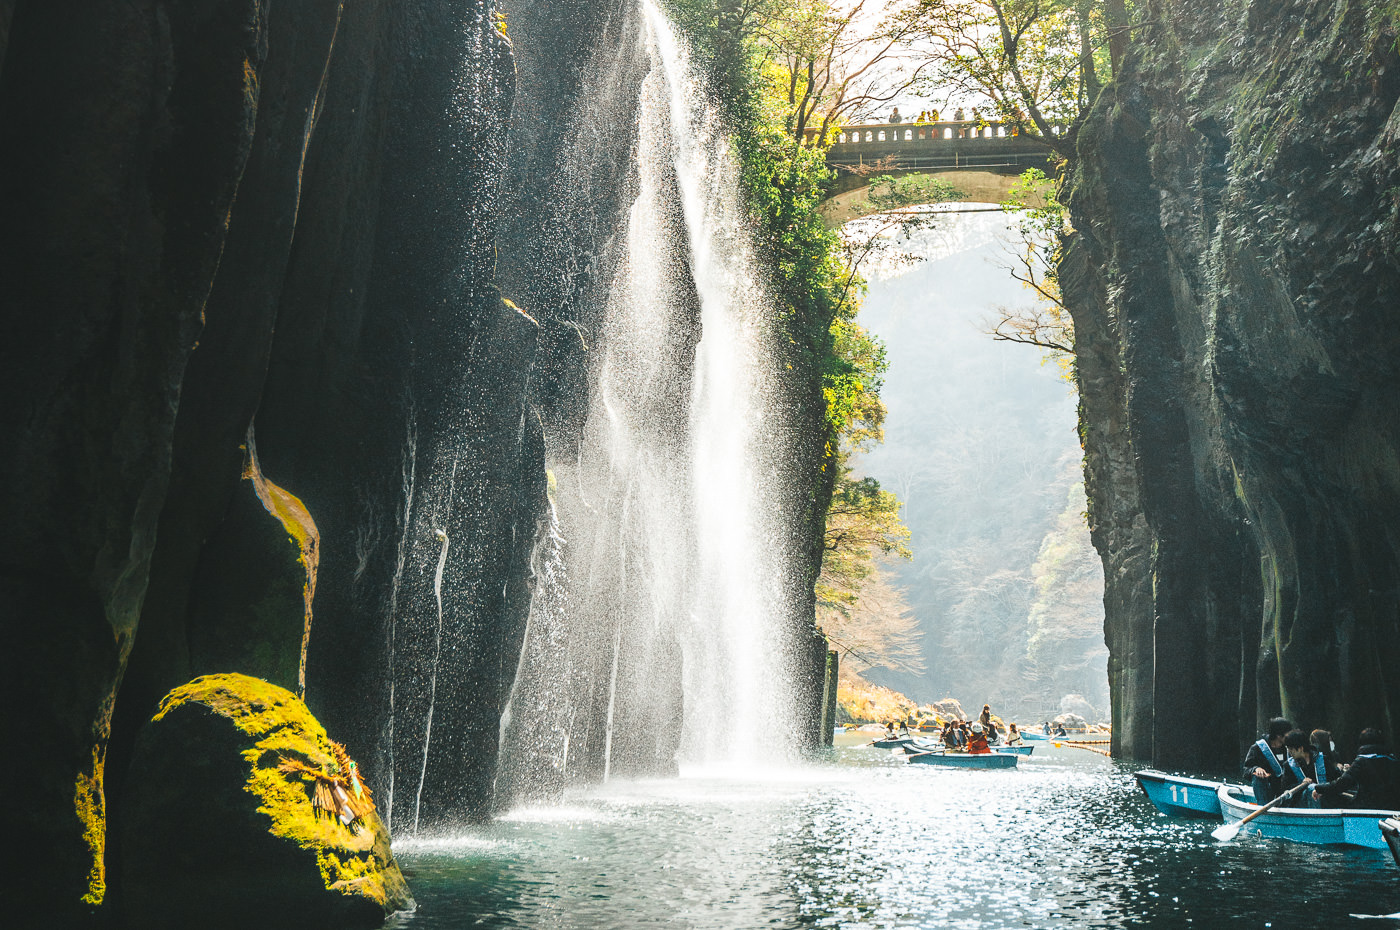 a group of people on a boat in front of a waterfall.